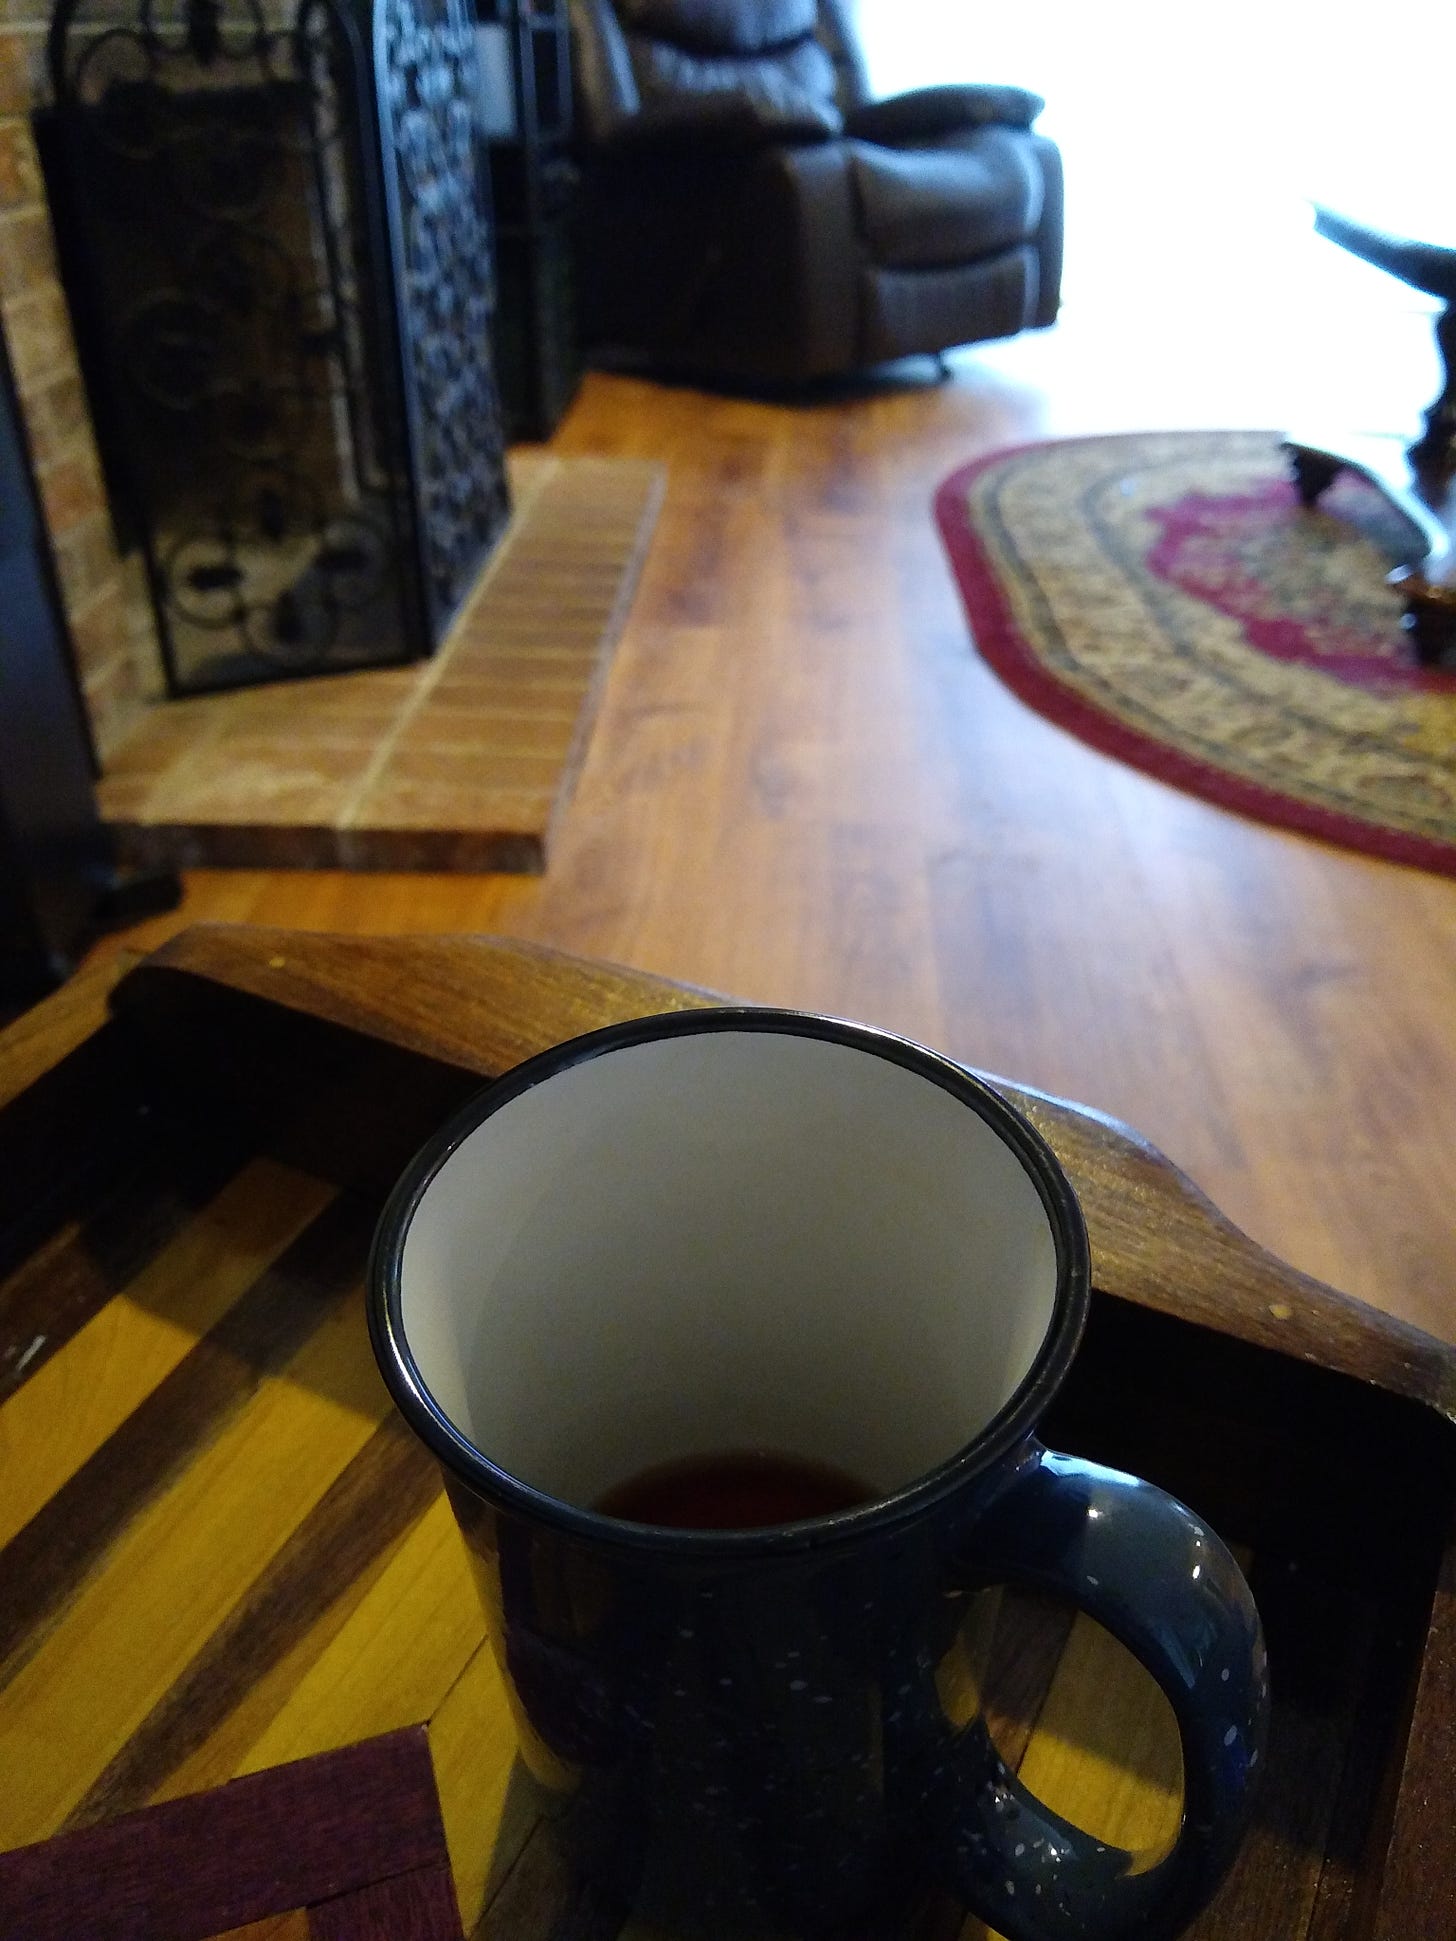 An almost empty mug of tea on a wooden tray, in a room with a fireplace, wood floor, area rug